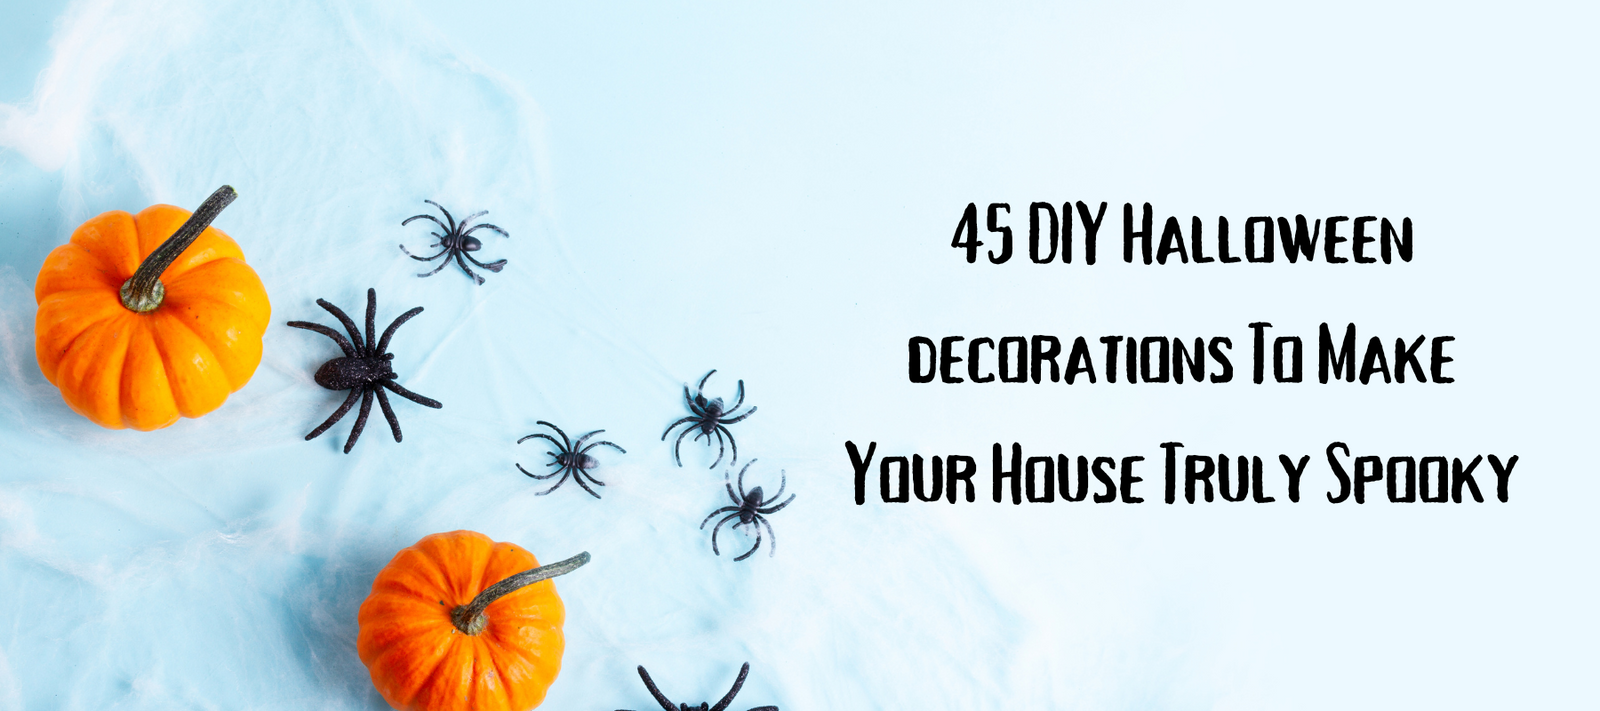 45 DIY Halloween decorations To Make Your House Truly Spooky - Unifury